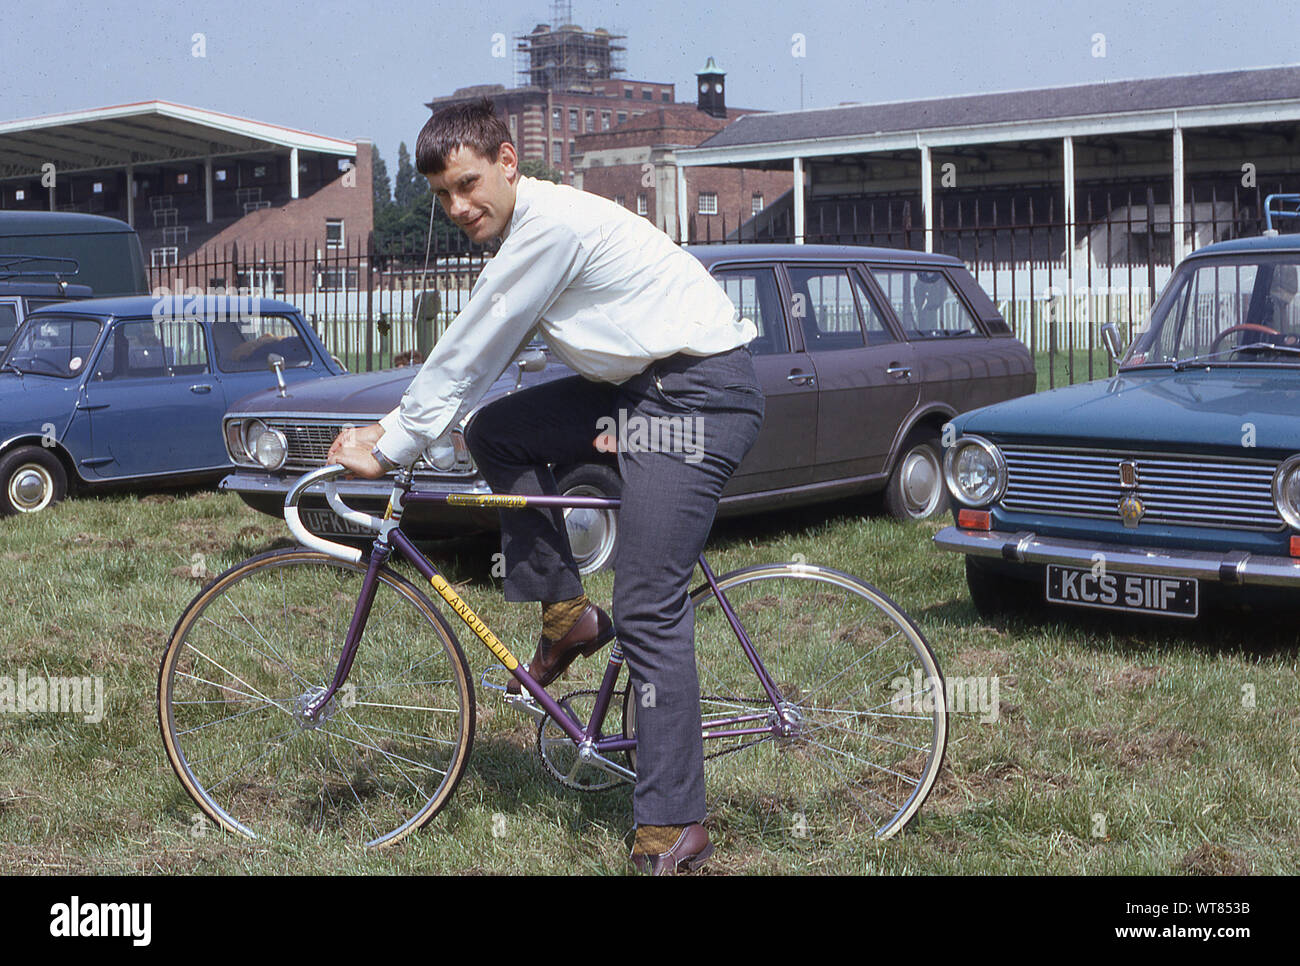 1960s, historical, a male cyclist sitting on a 'J. Anquetil' track bicycle at the York race course during the CTC rally, England, UK. Cars of the era, a Ford Cortina, British Leyland Mini and an Italian 'Fiat' can be seen in the picture. Stock Photo